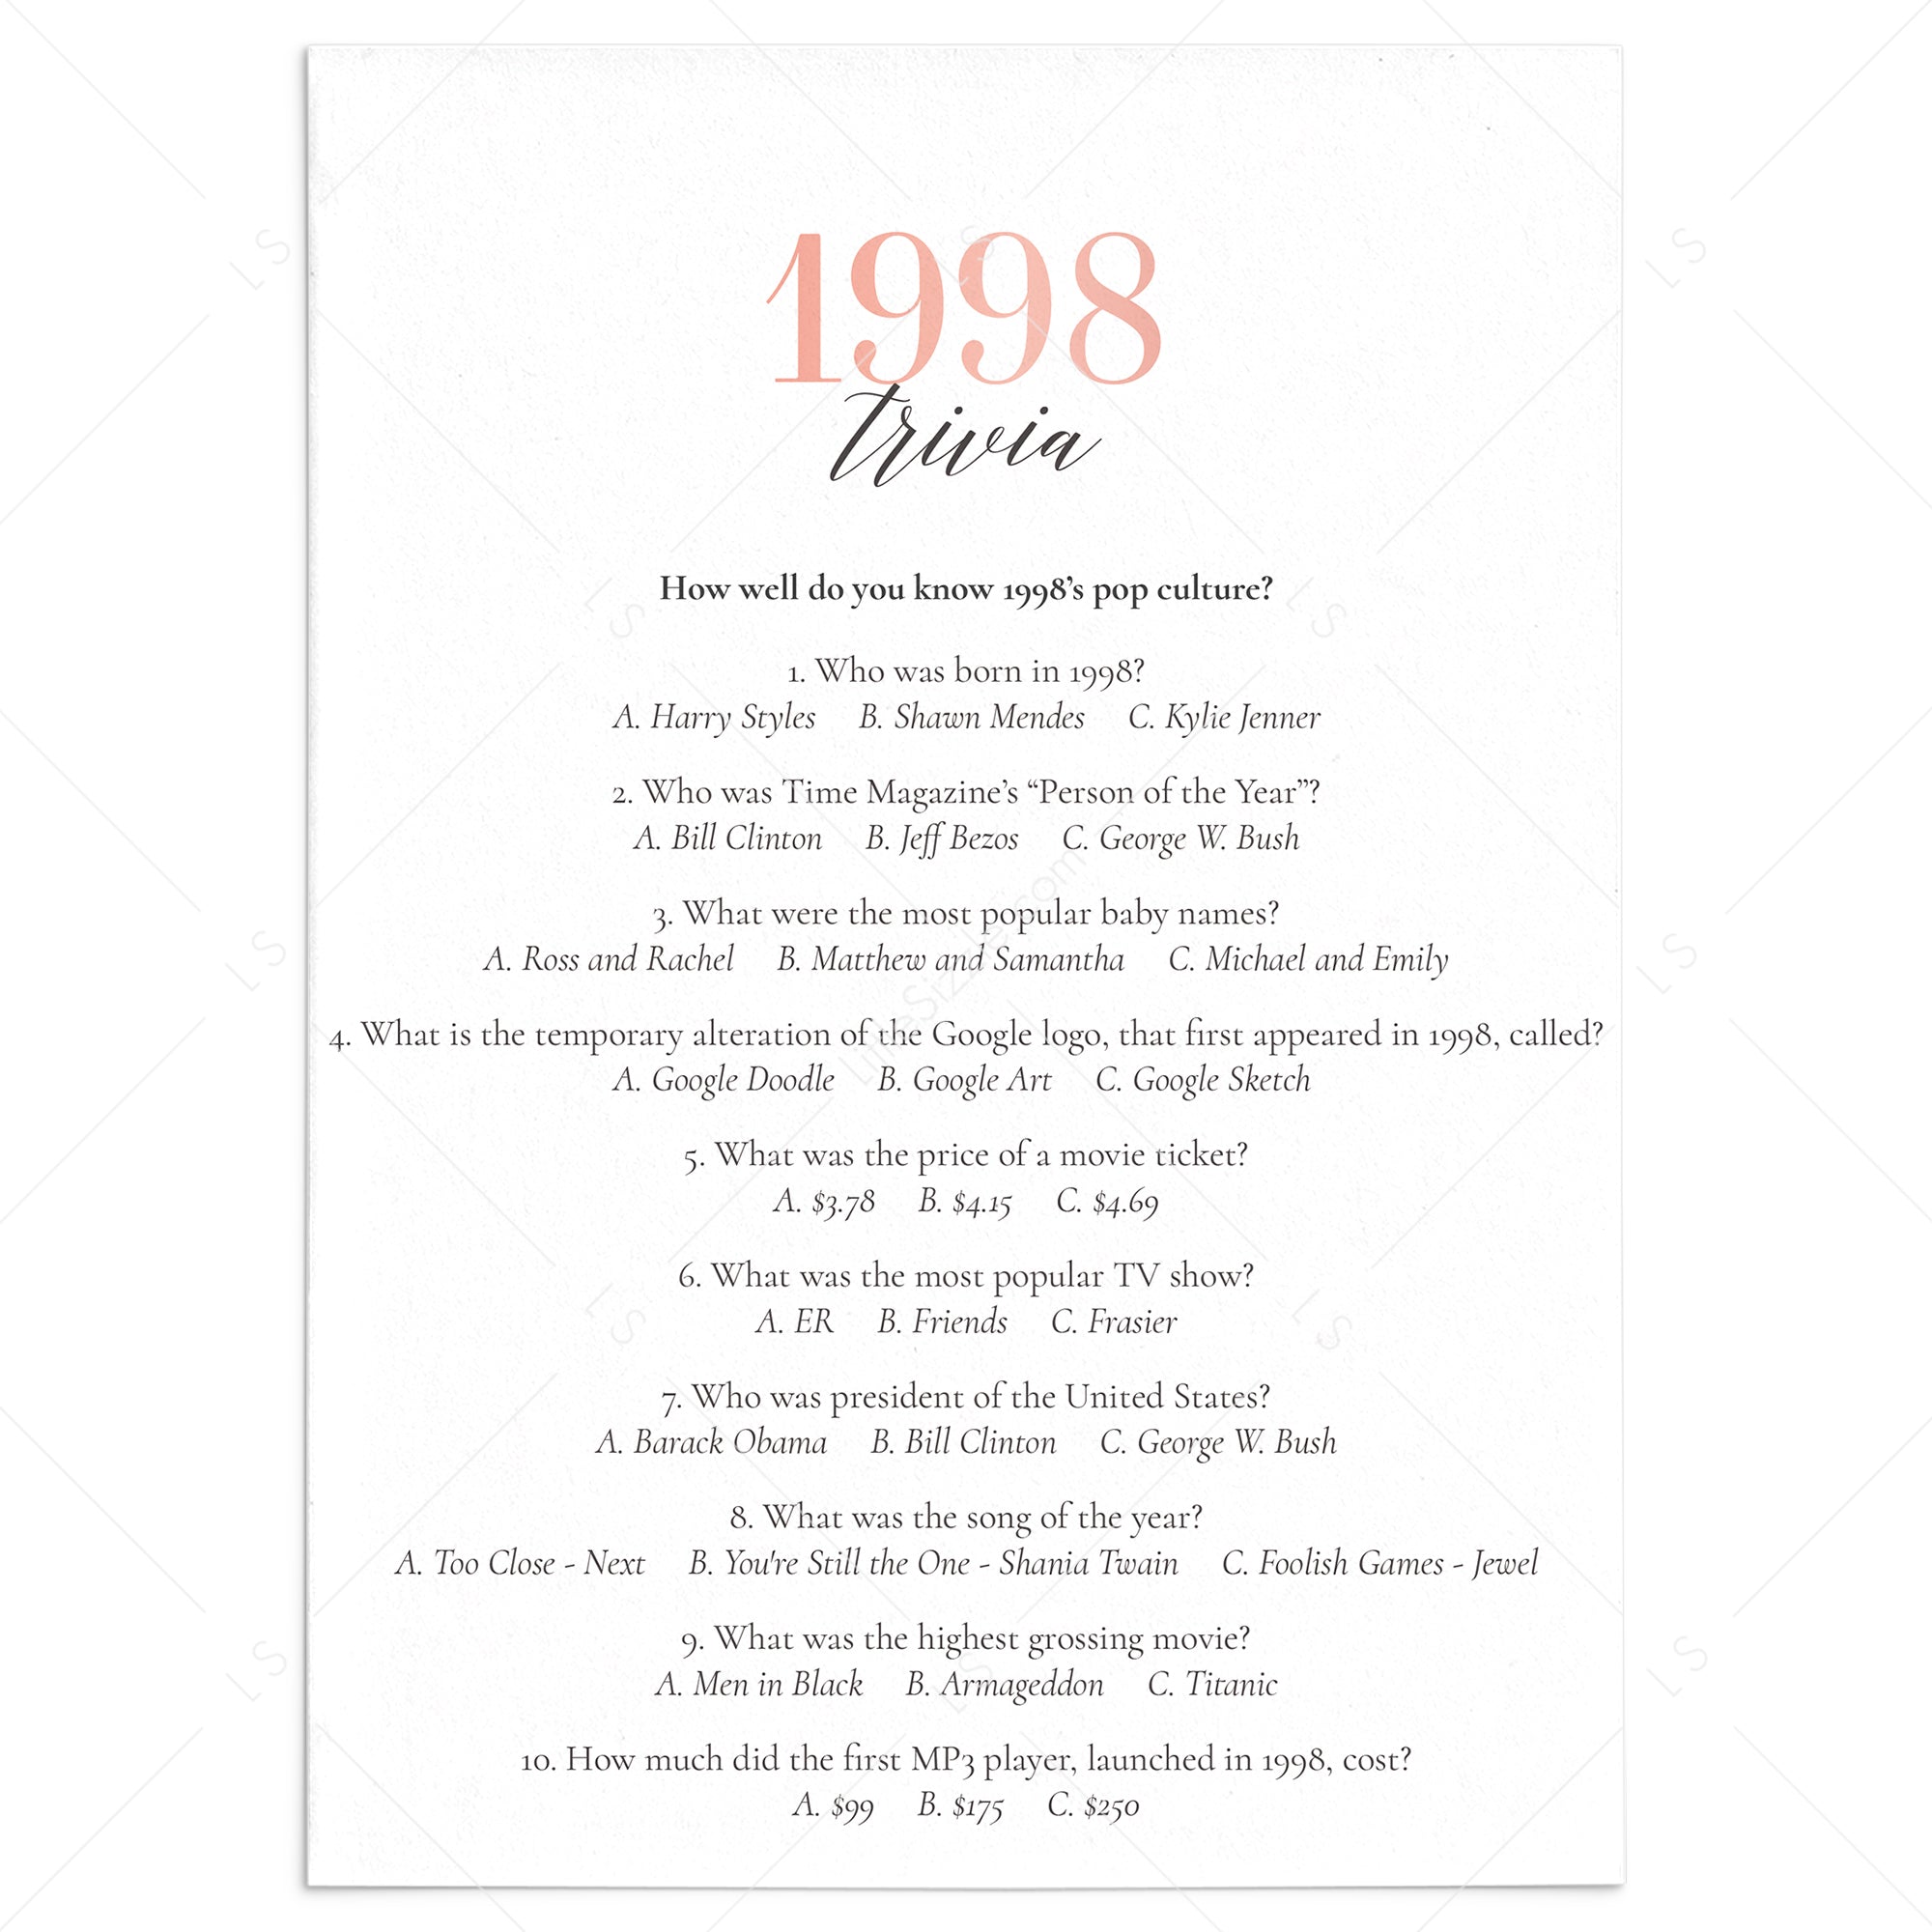 1998 Trivia Questions and Answers Printable by LittleSizzle